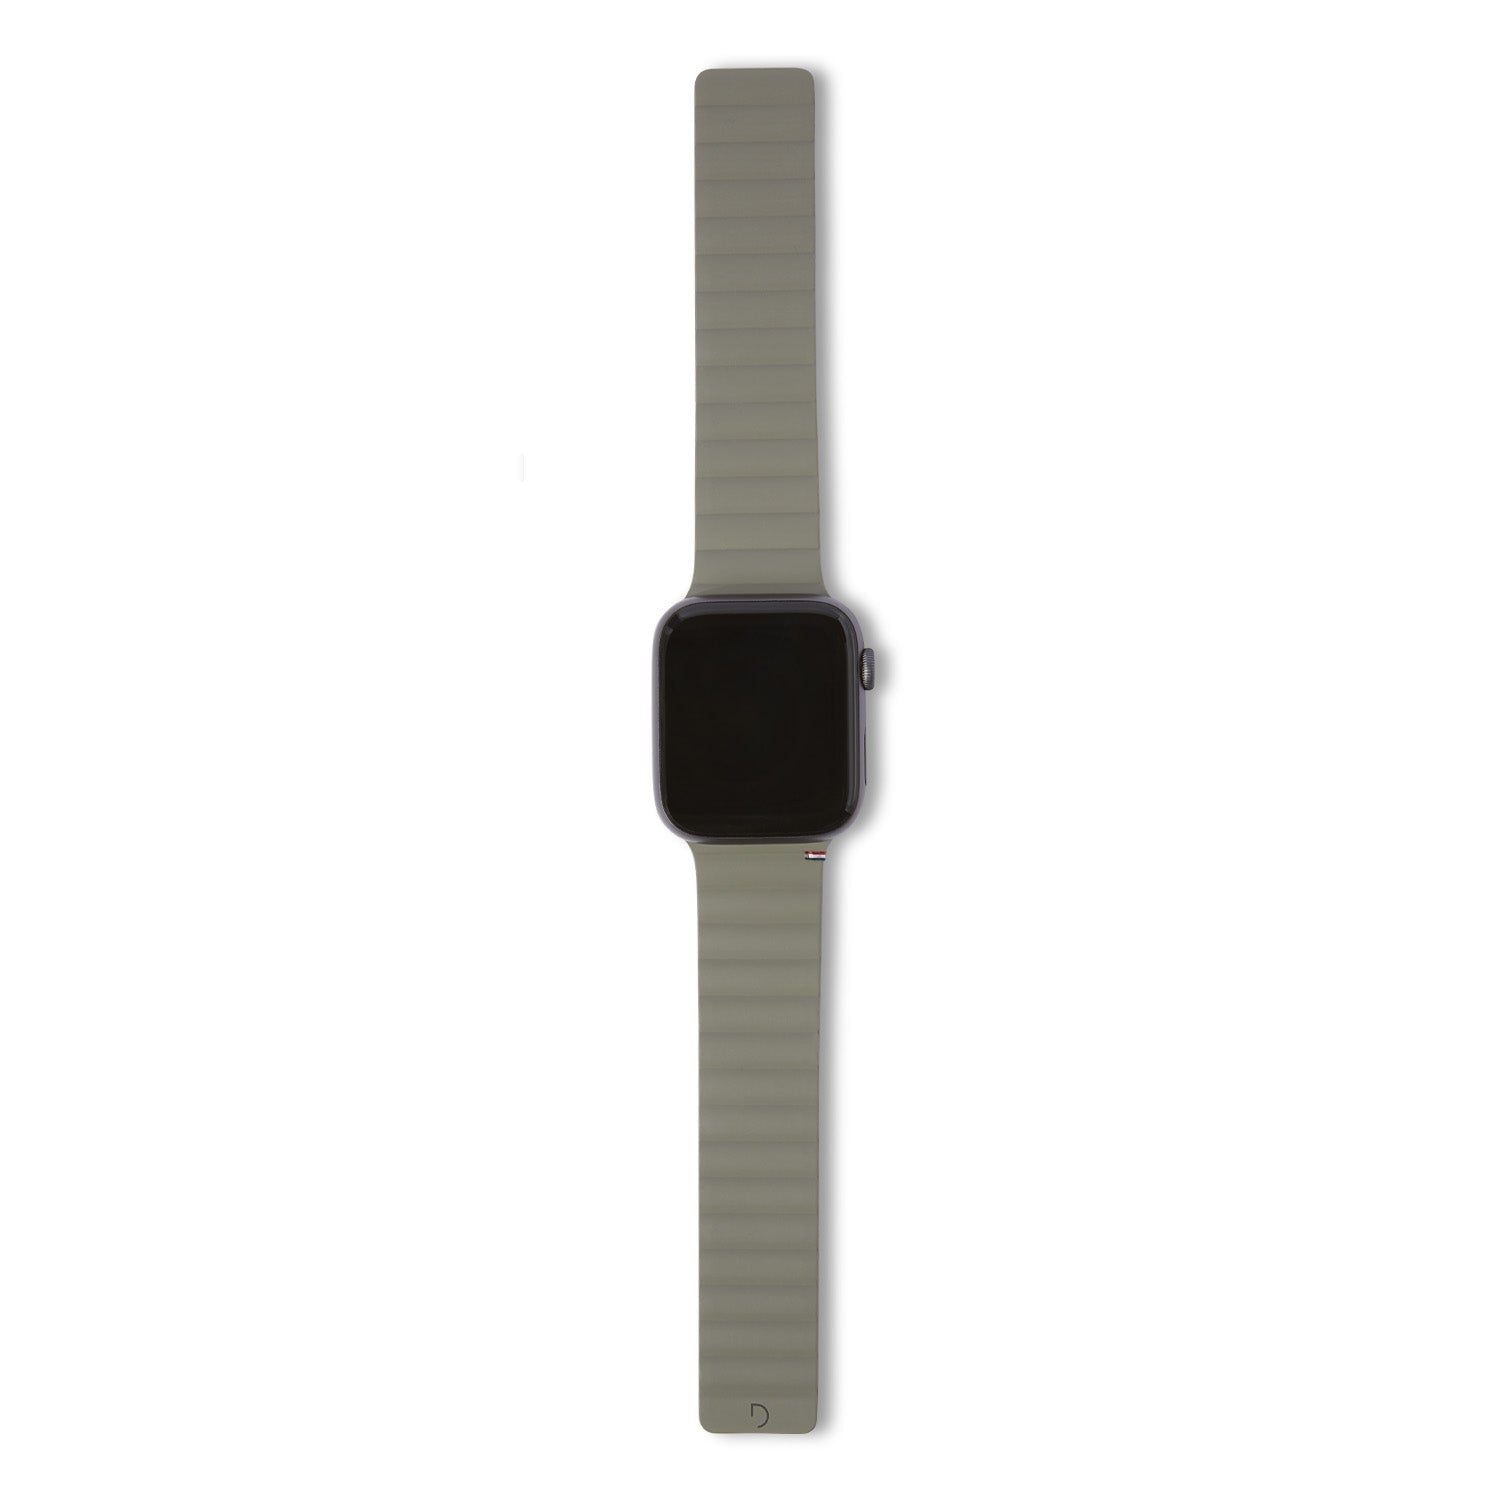 Silicone Magnetic Traction Strap Lite Apple Watch 41mm Series 7 Olive